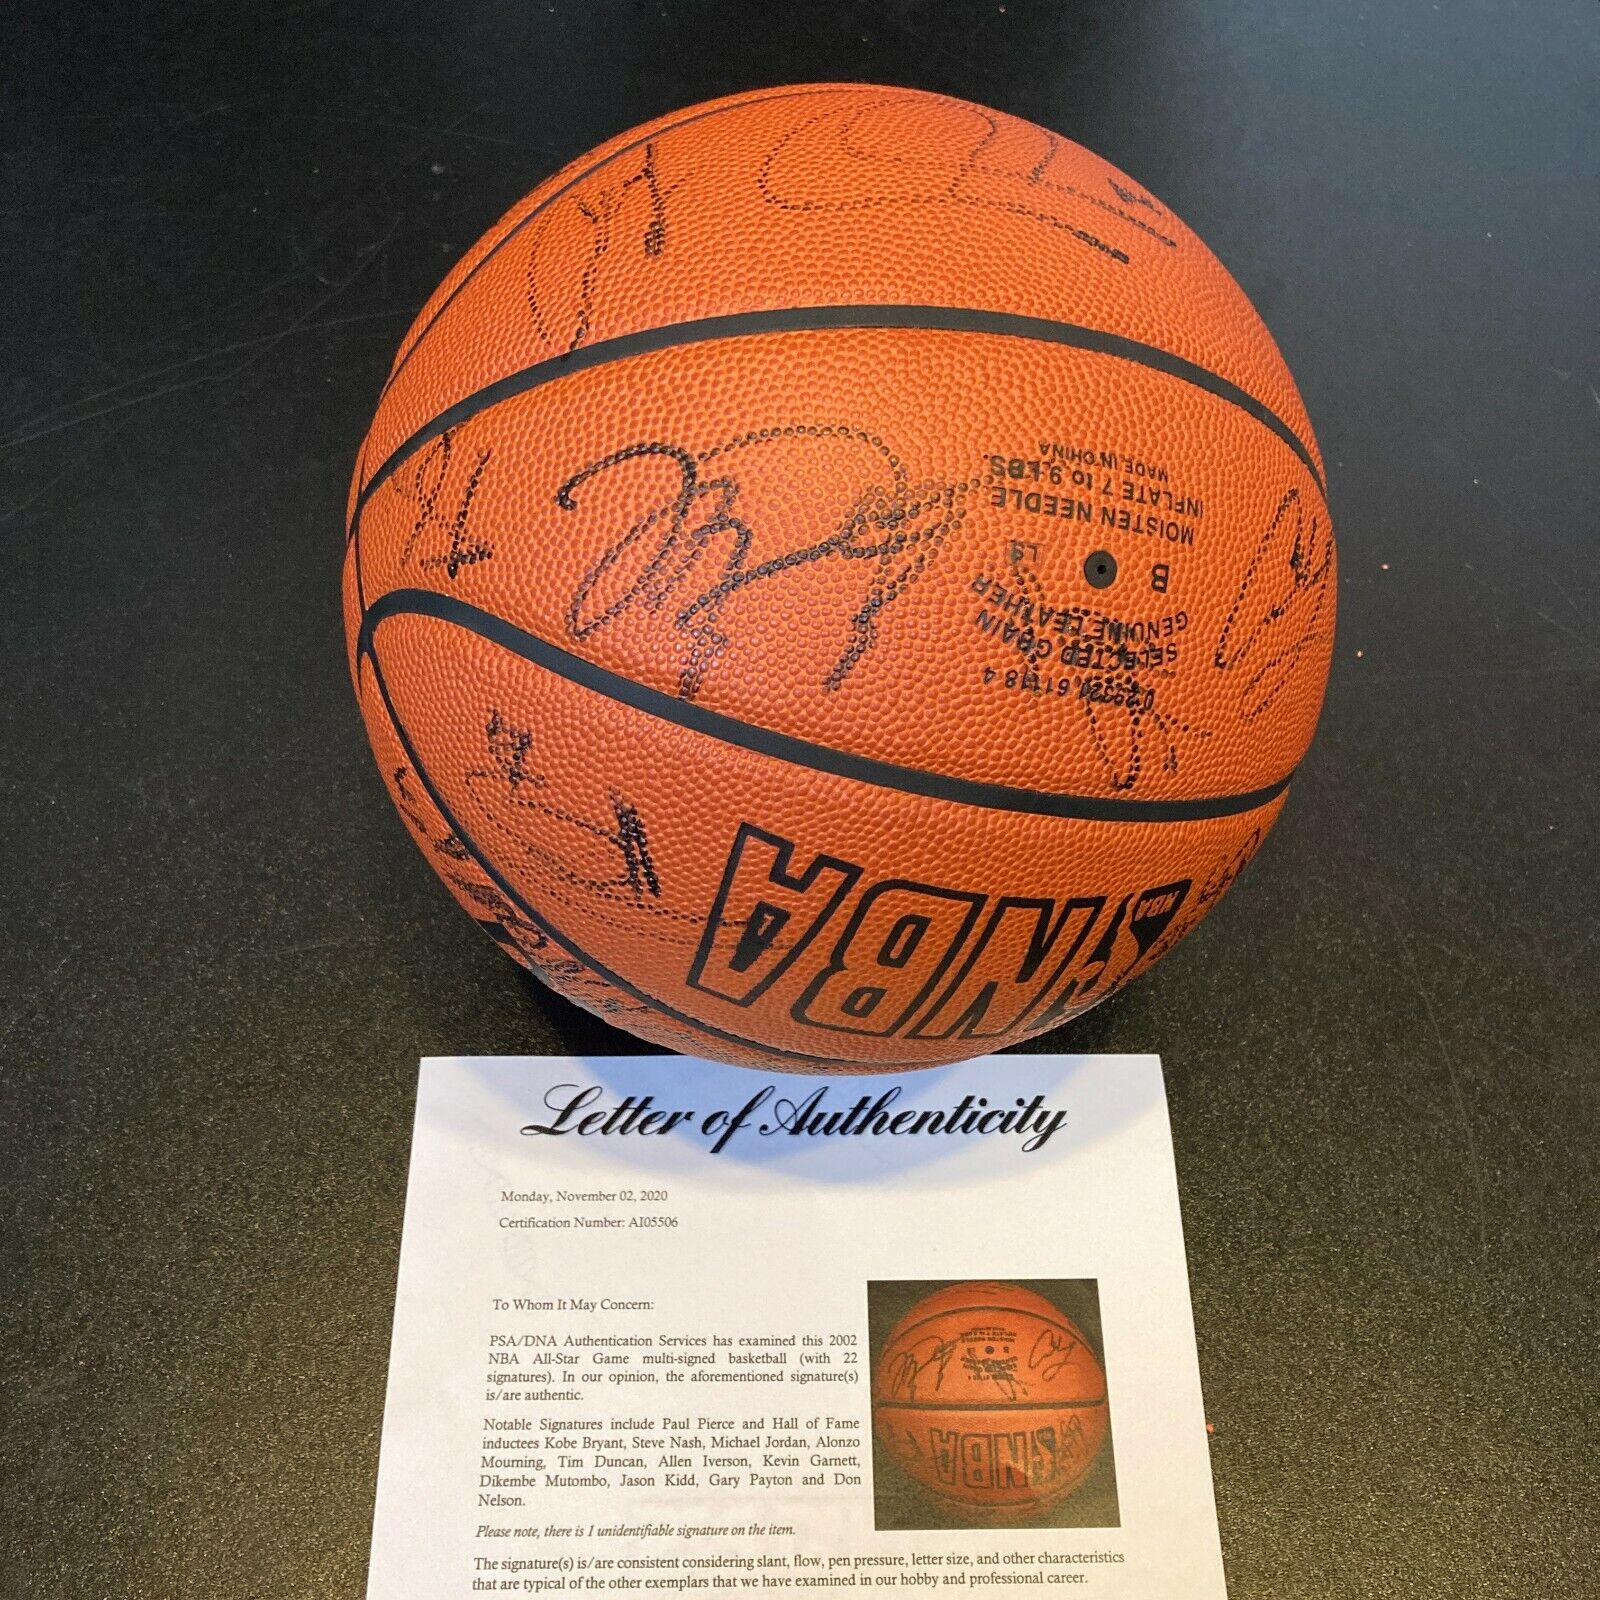 Sold at Auction: 2002 NBA All-Star Game autographed basketball - (21)  signatures incl. Jordan and Kobe.